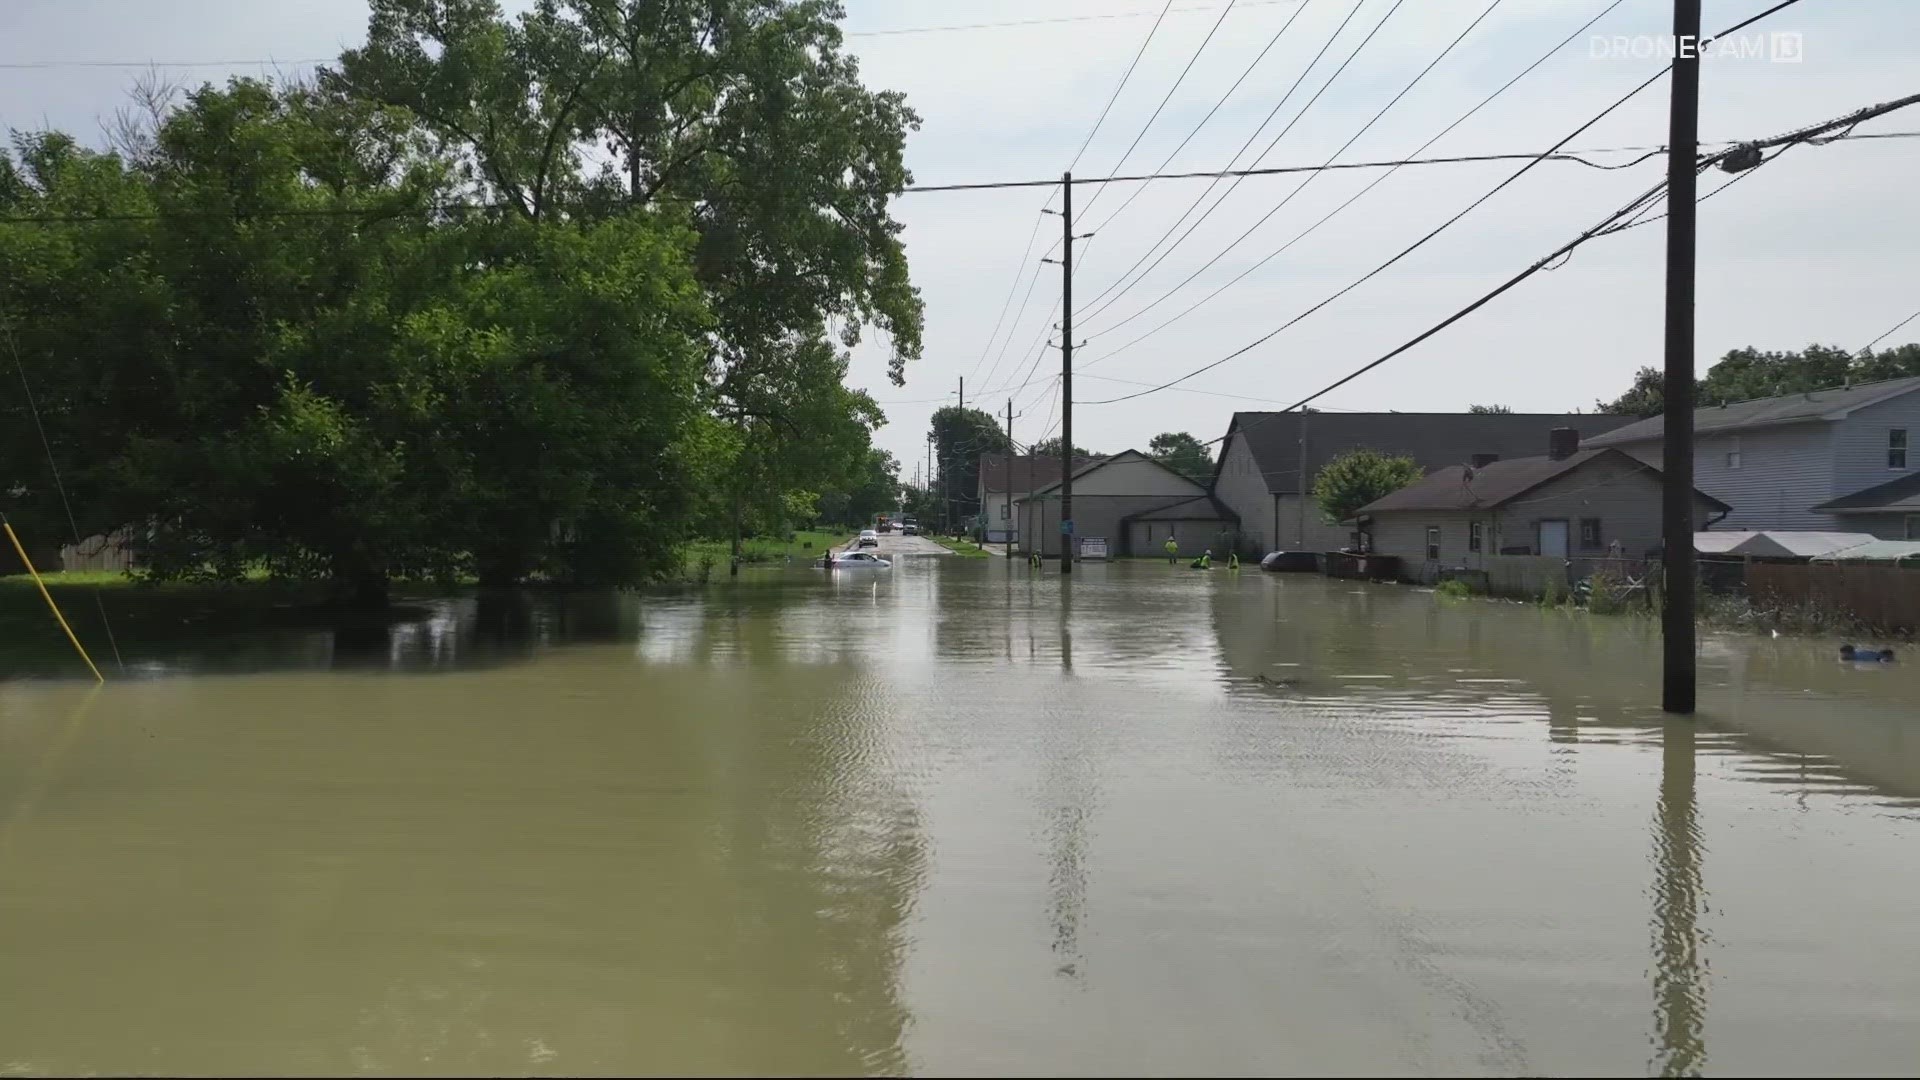 Crews are trying to make repairs after the break flooded a two-block area.